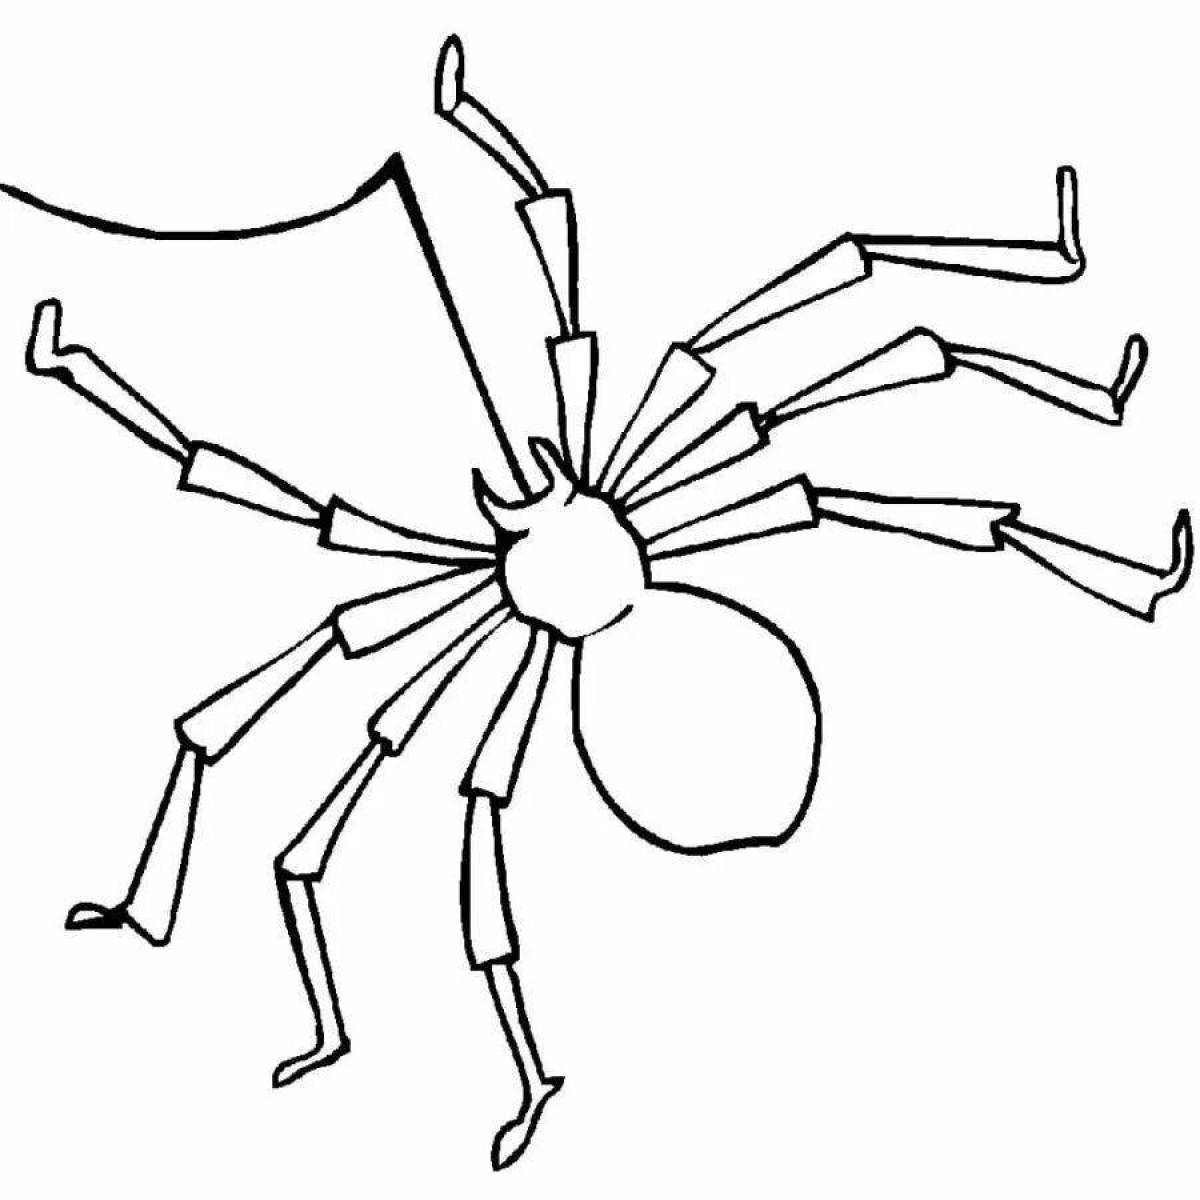 Sparkly spider coloring page for students